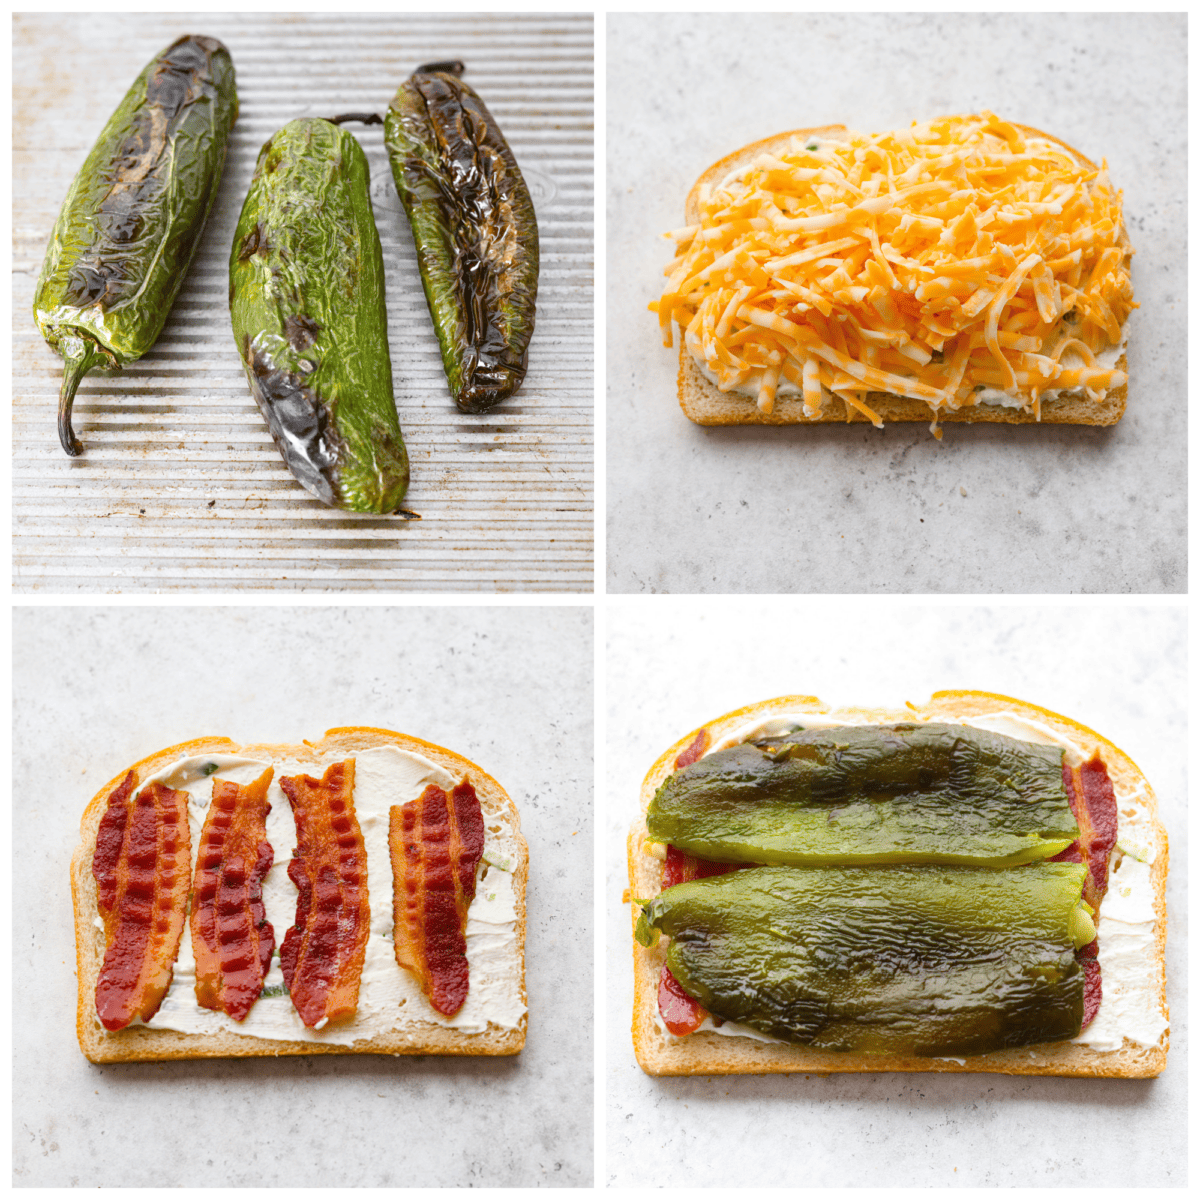 4-photo collage of the jalapenos being roasted and the sandwich assembled.